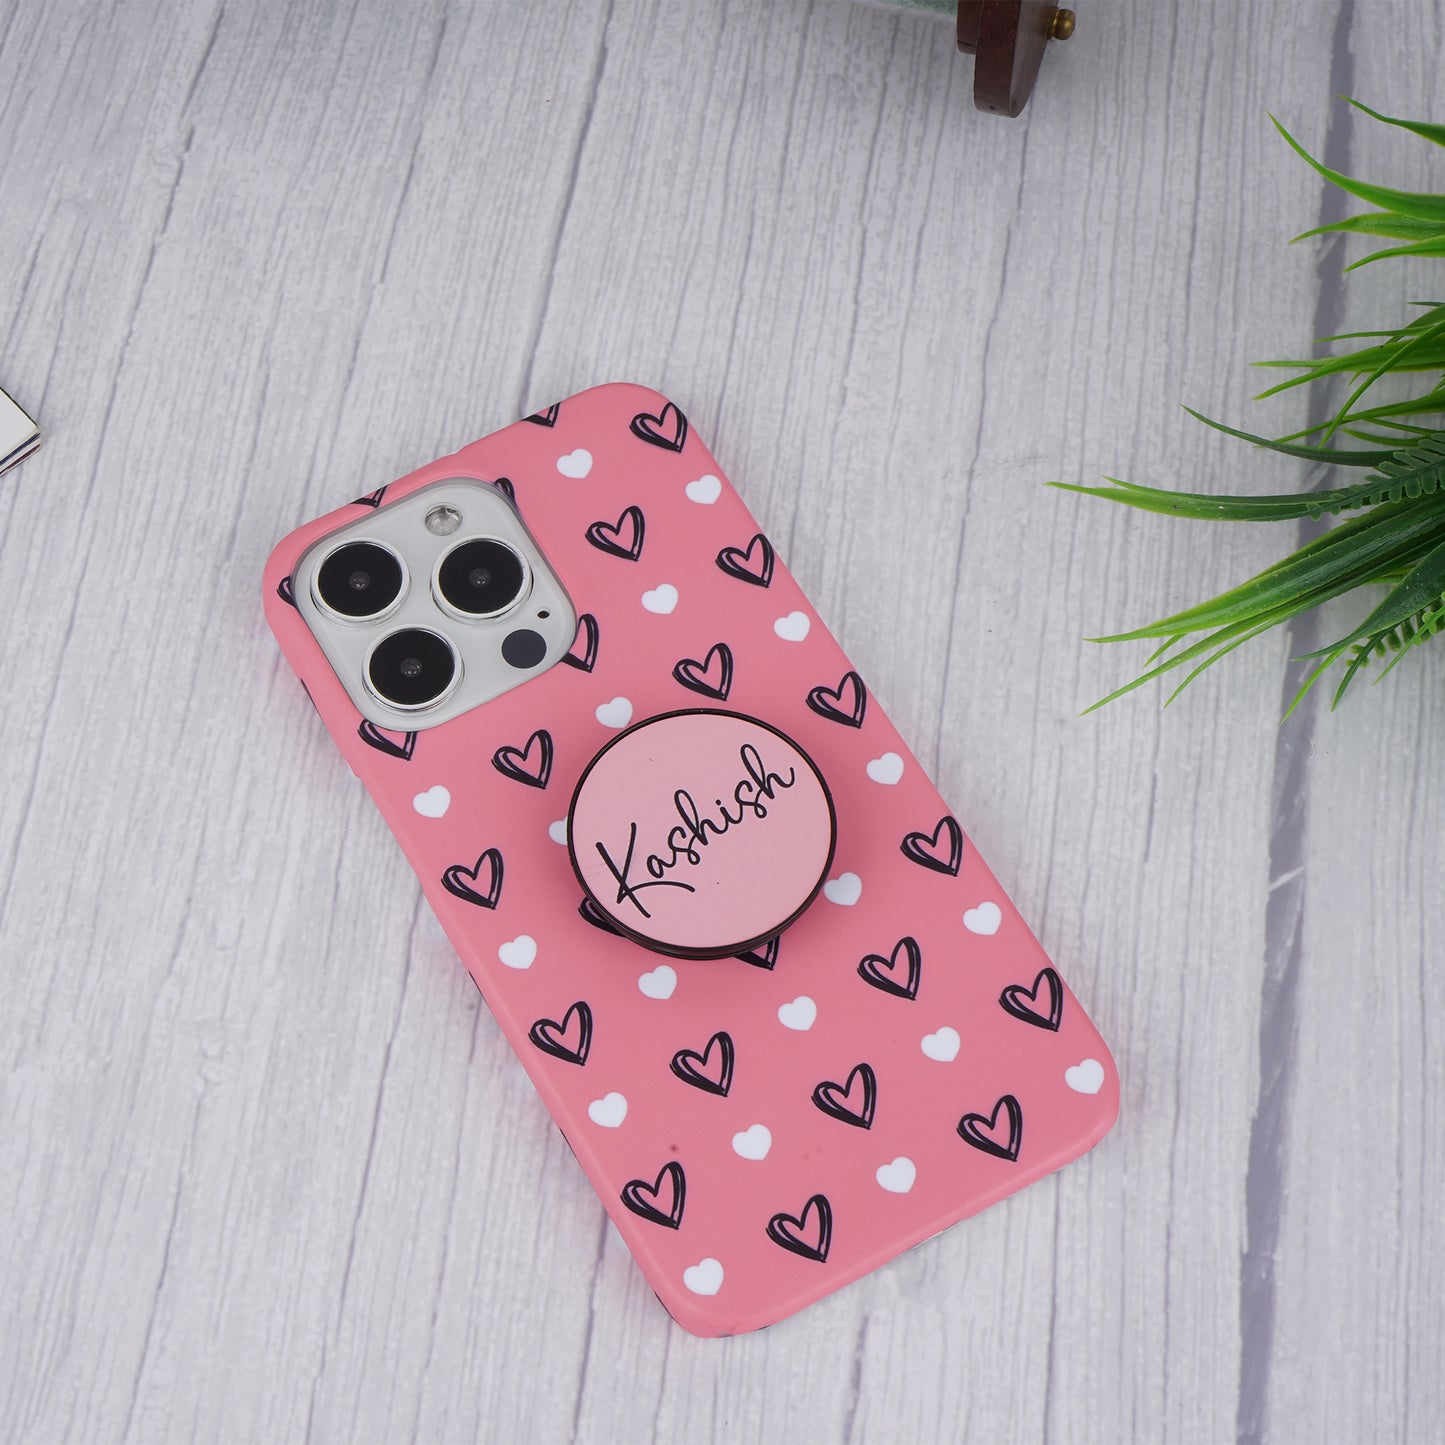 Heart Pattern Slim Case Cover With Customized Holder